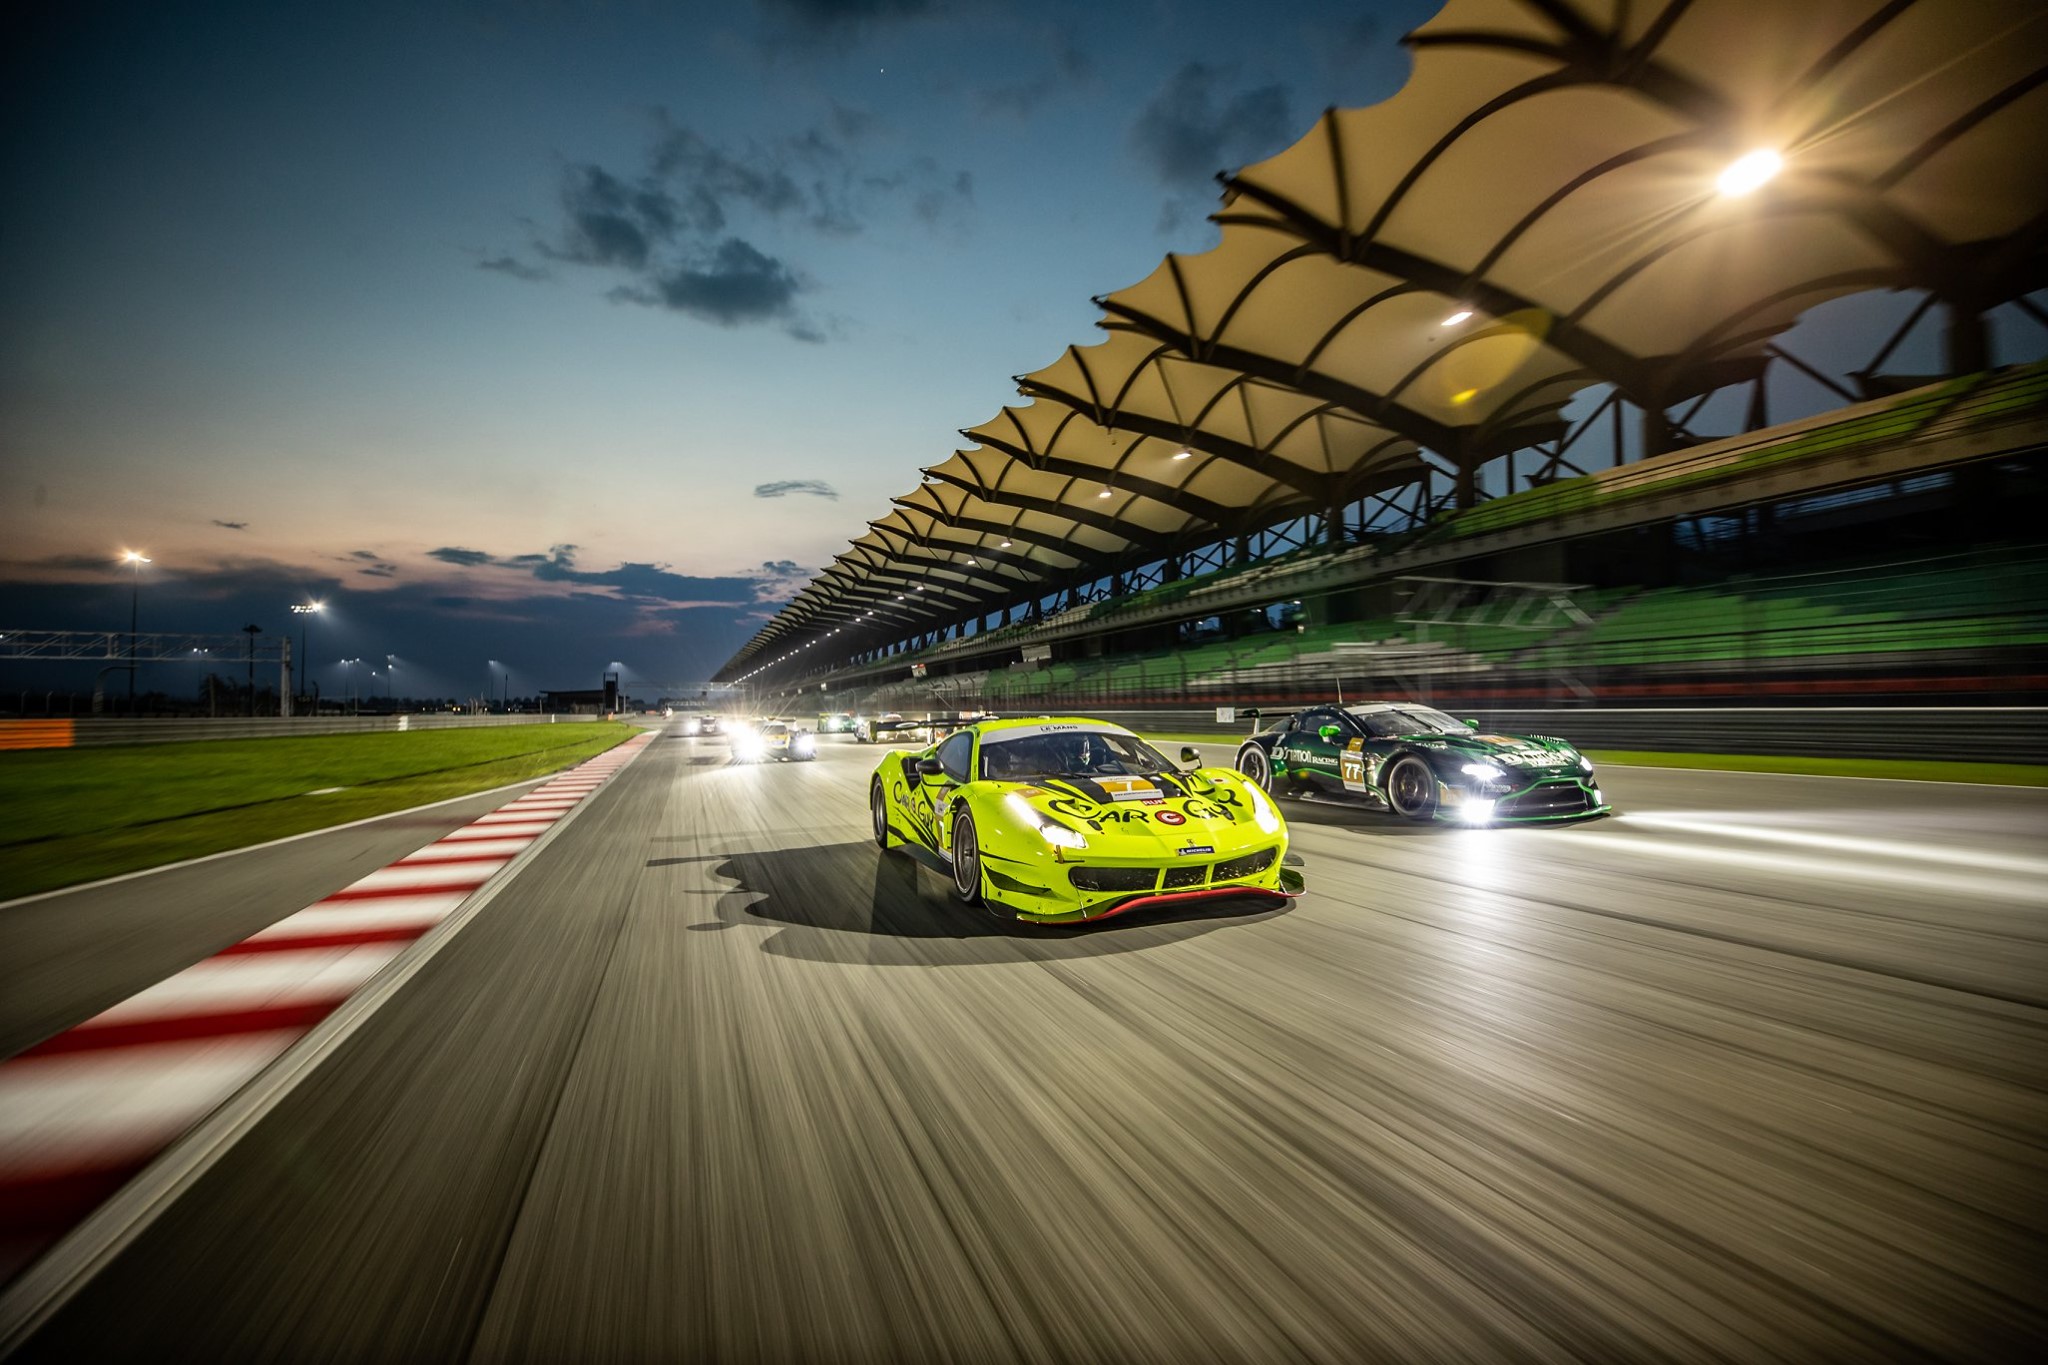 Under Lights In Sepang - 2